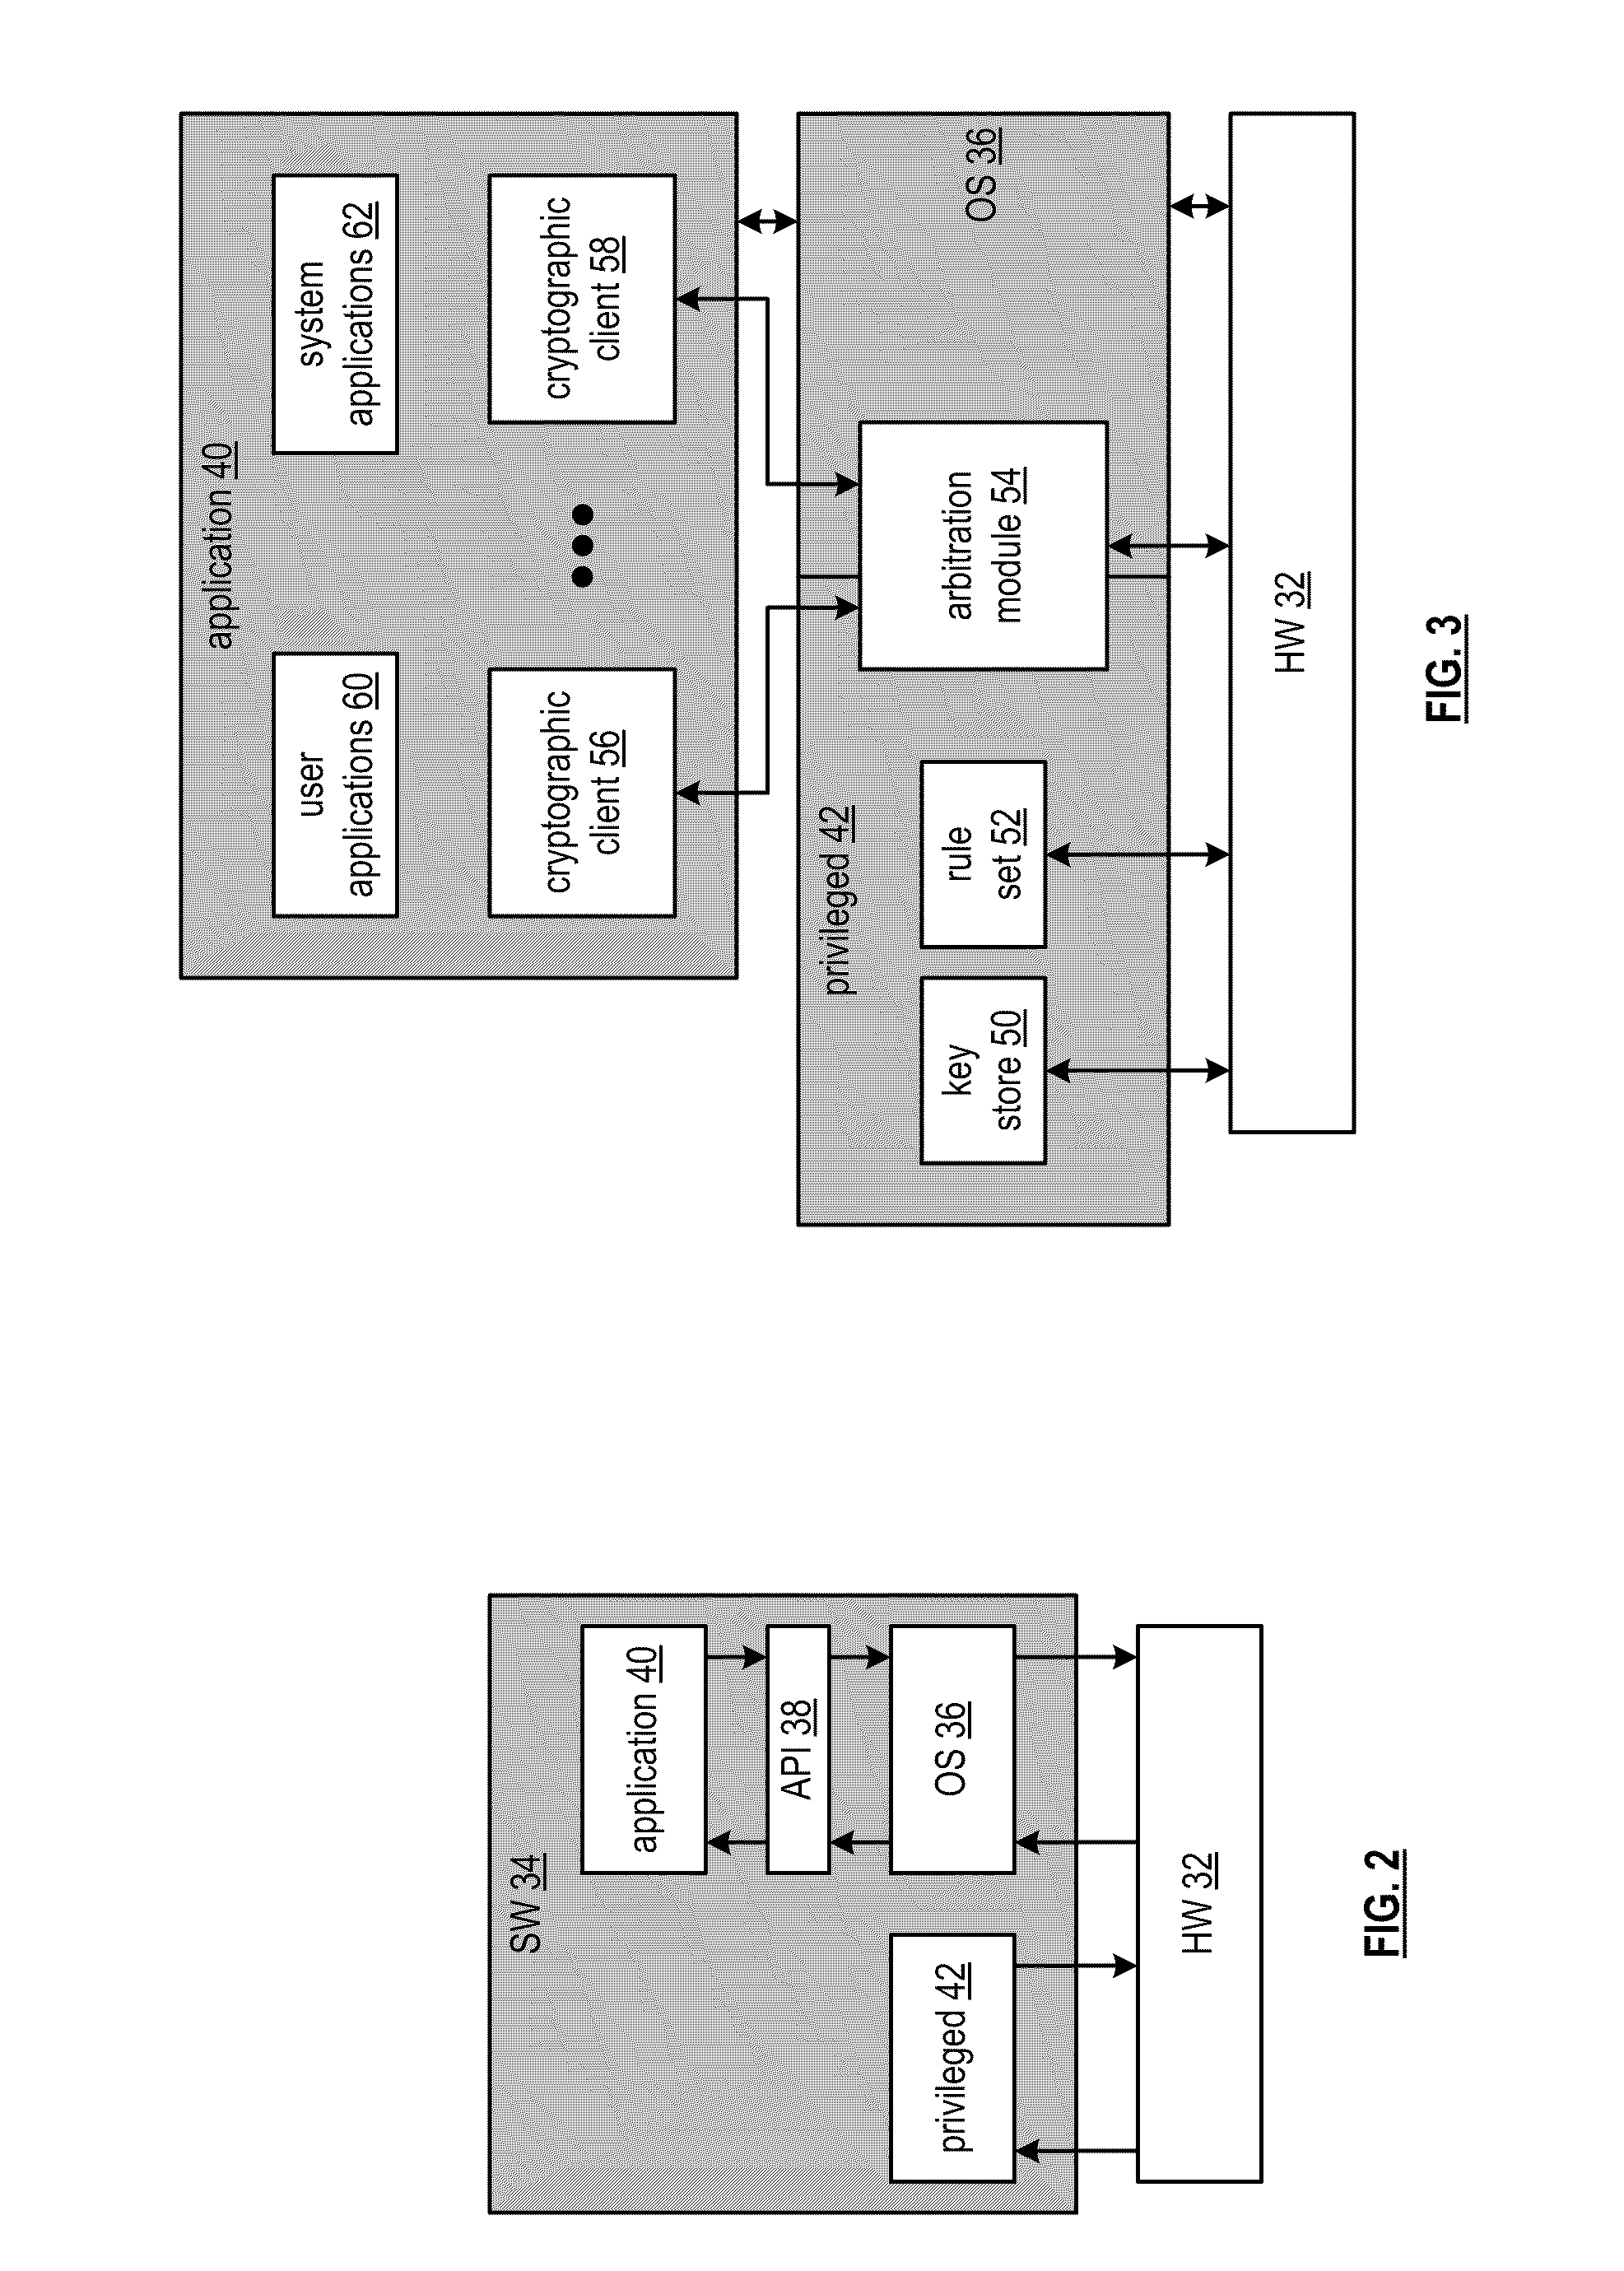 Secure key access with one-time programmable memory and applications thereof